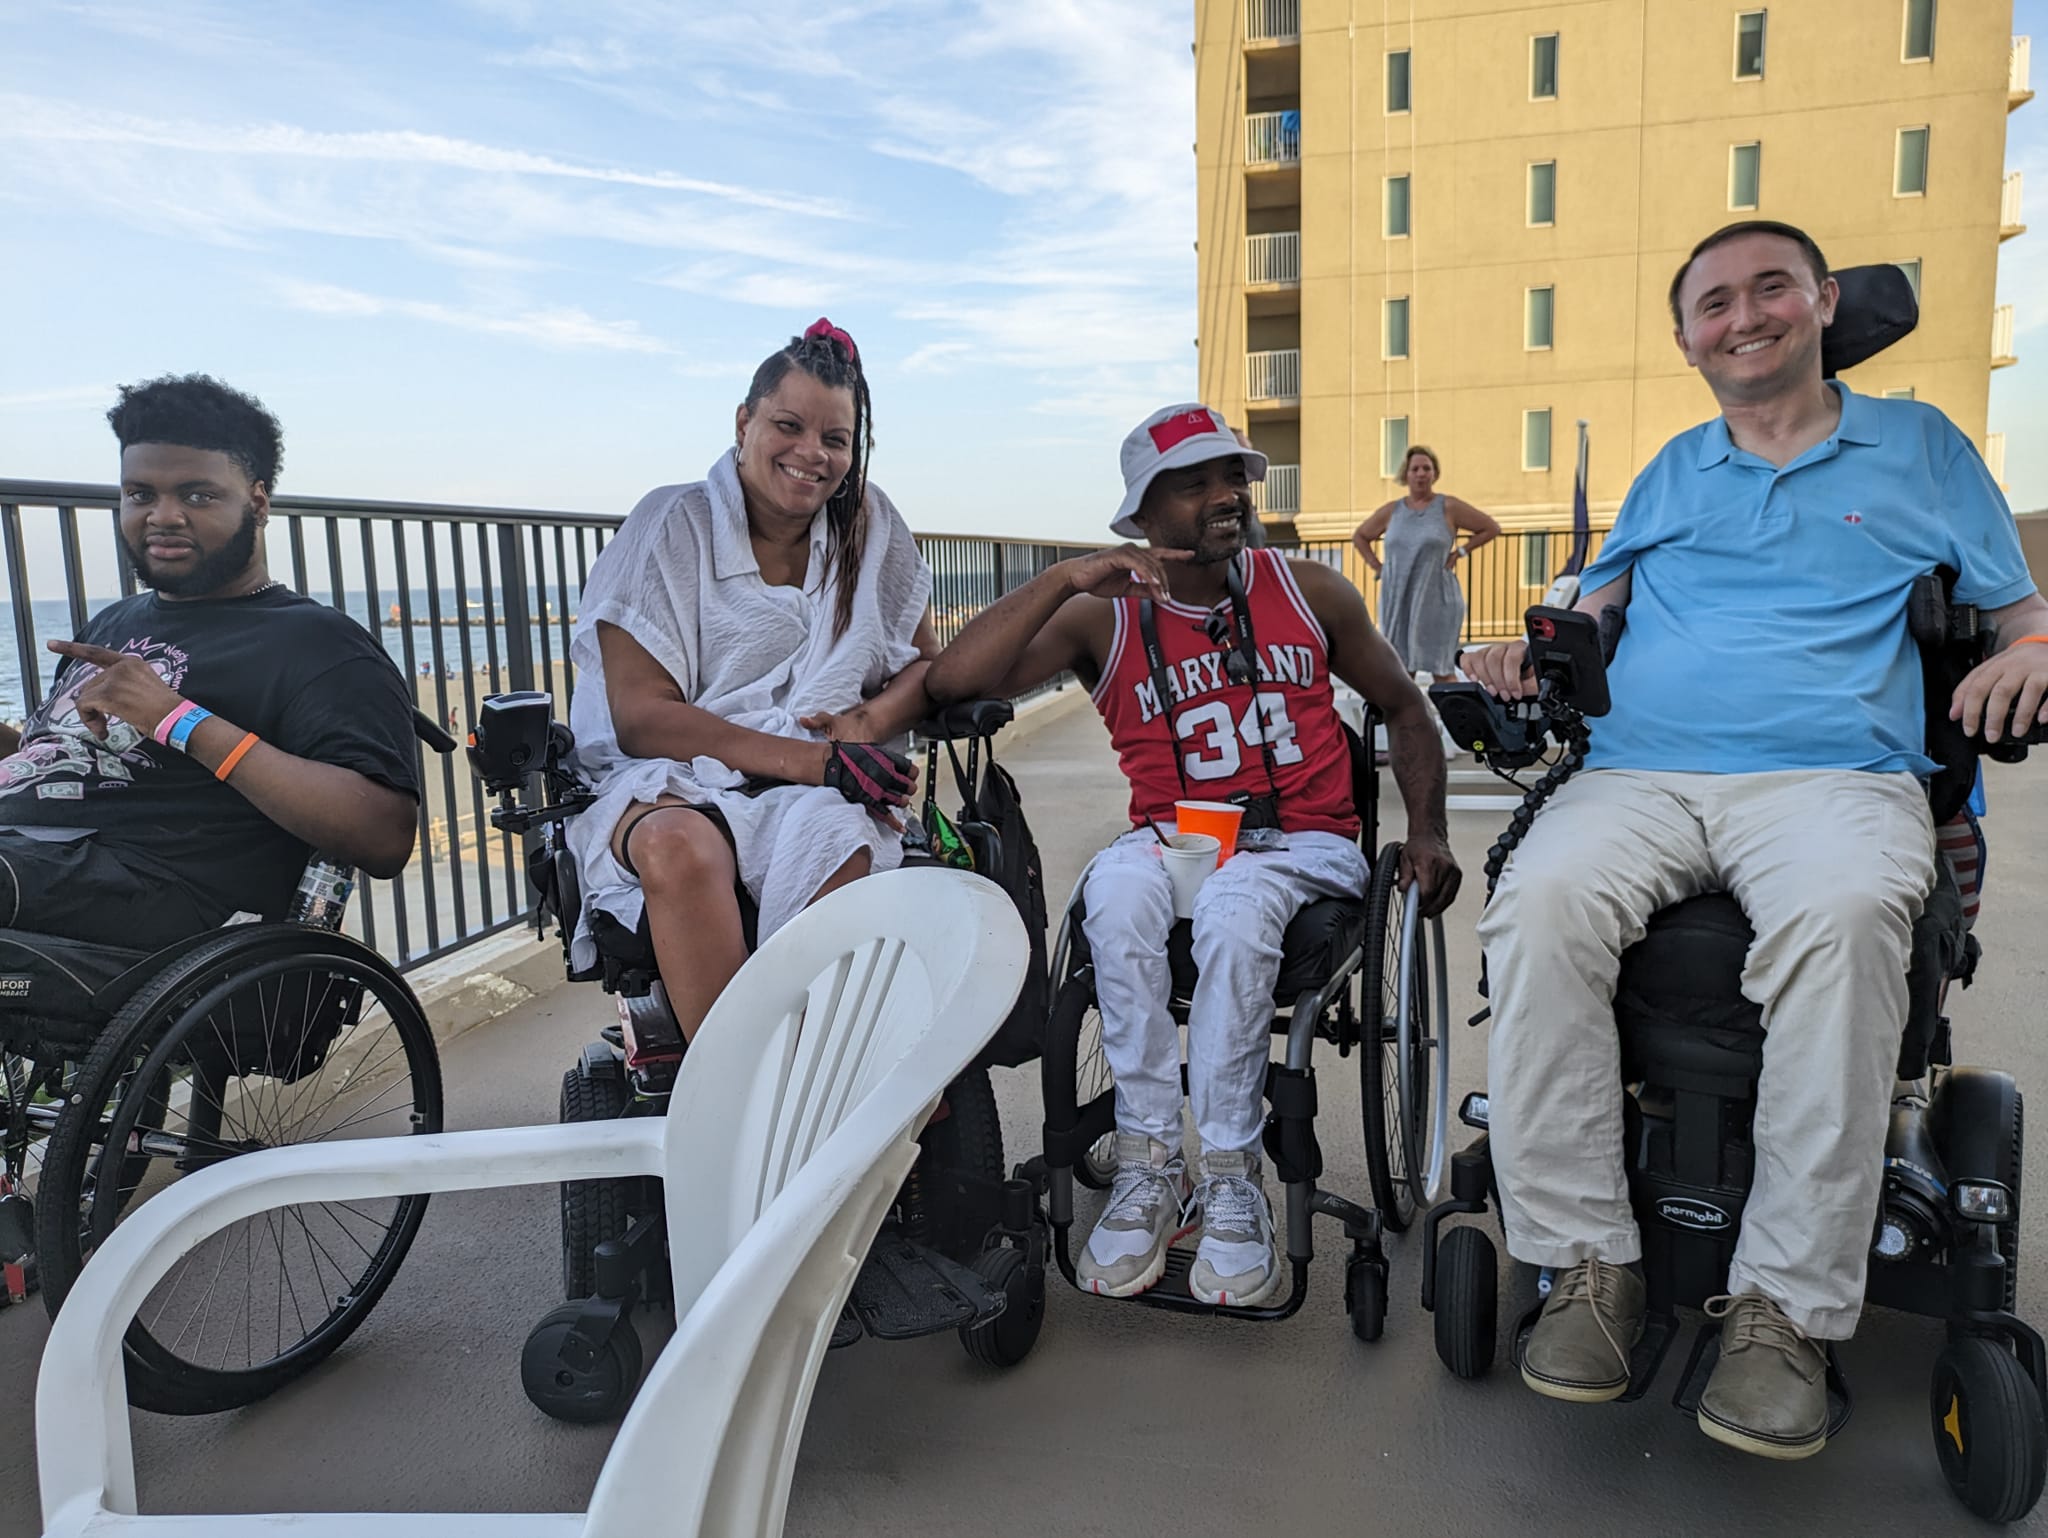 Four people in wheelchairs sitting and smiling together on concrete patio.